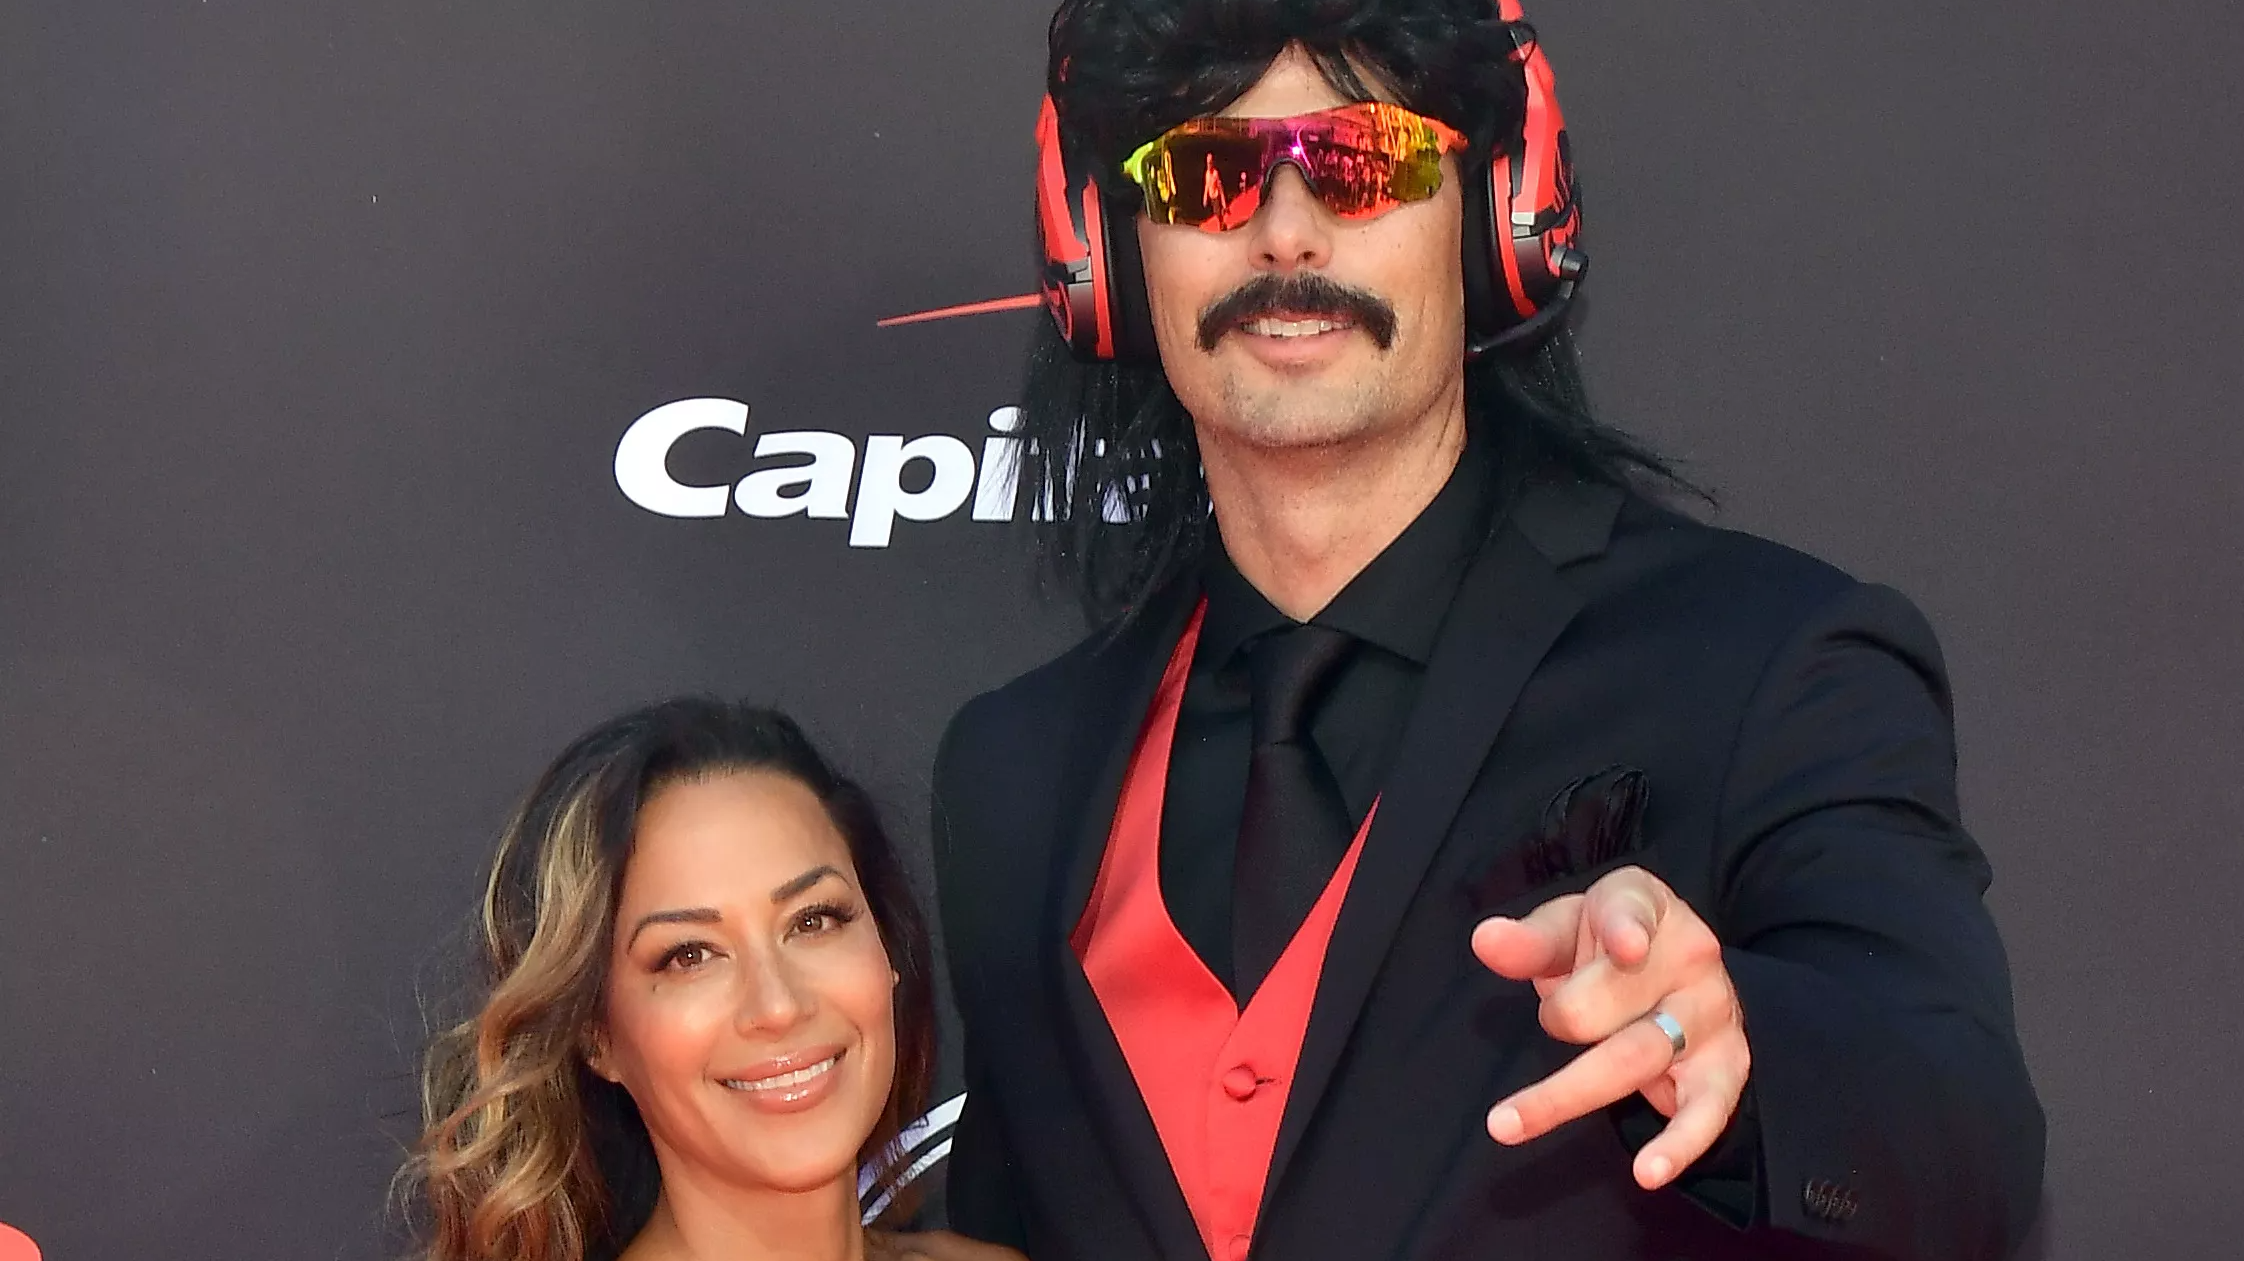 Dr DisRespect’s Wife Breaks Silence, Shows Support Amid Twitch Banning